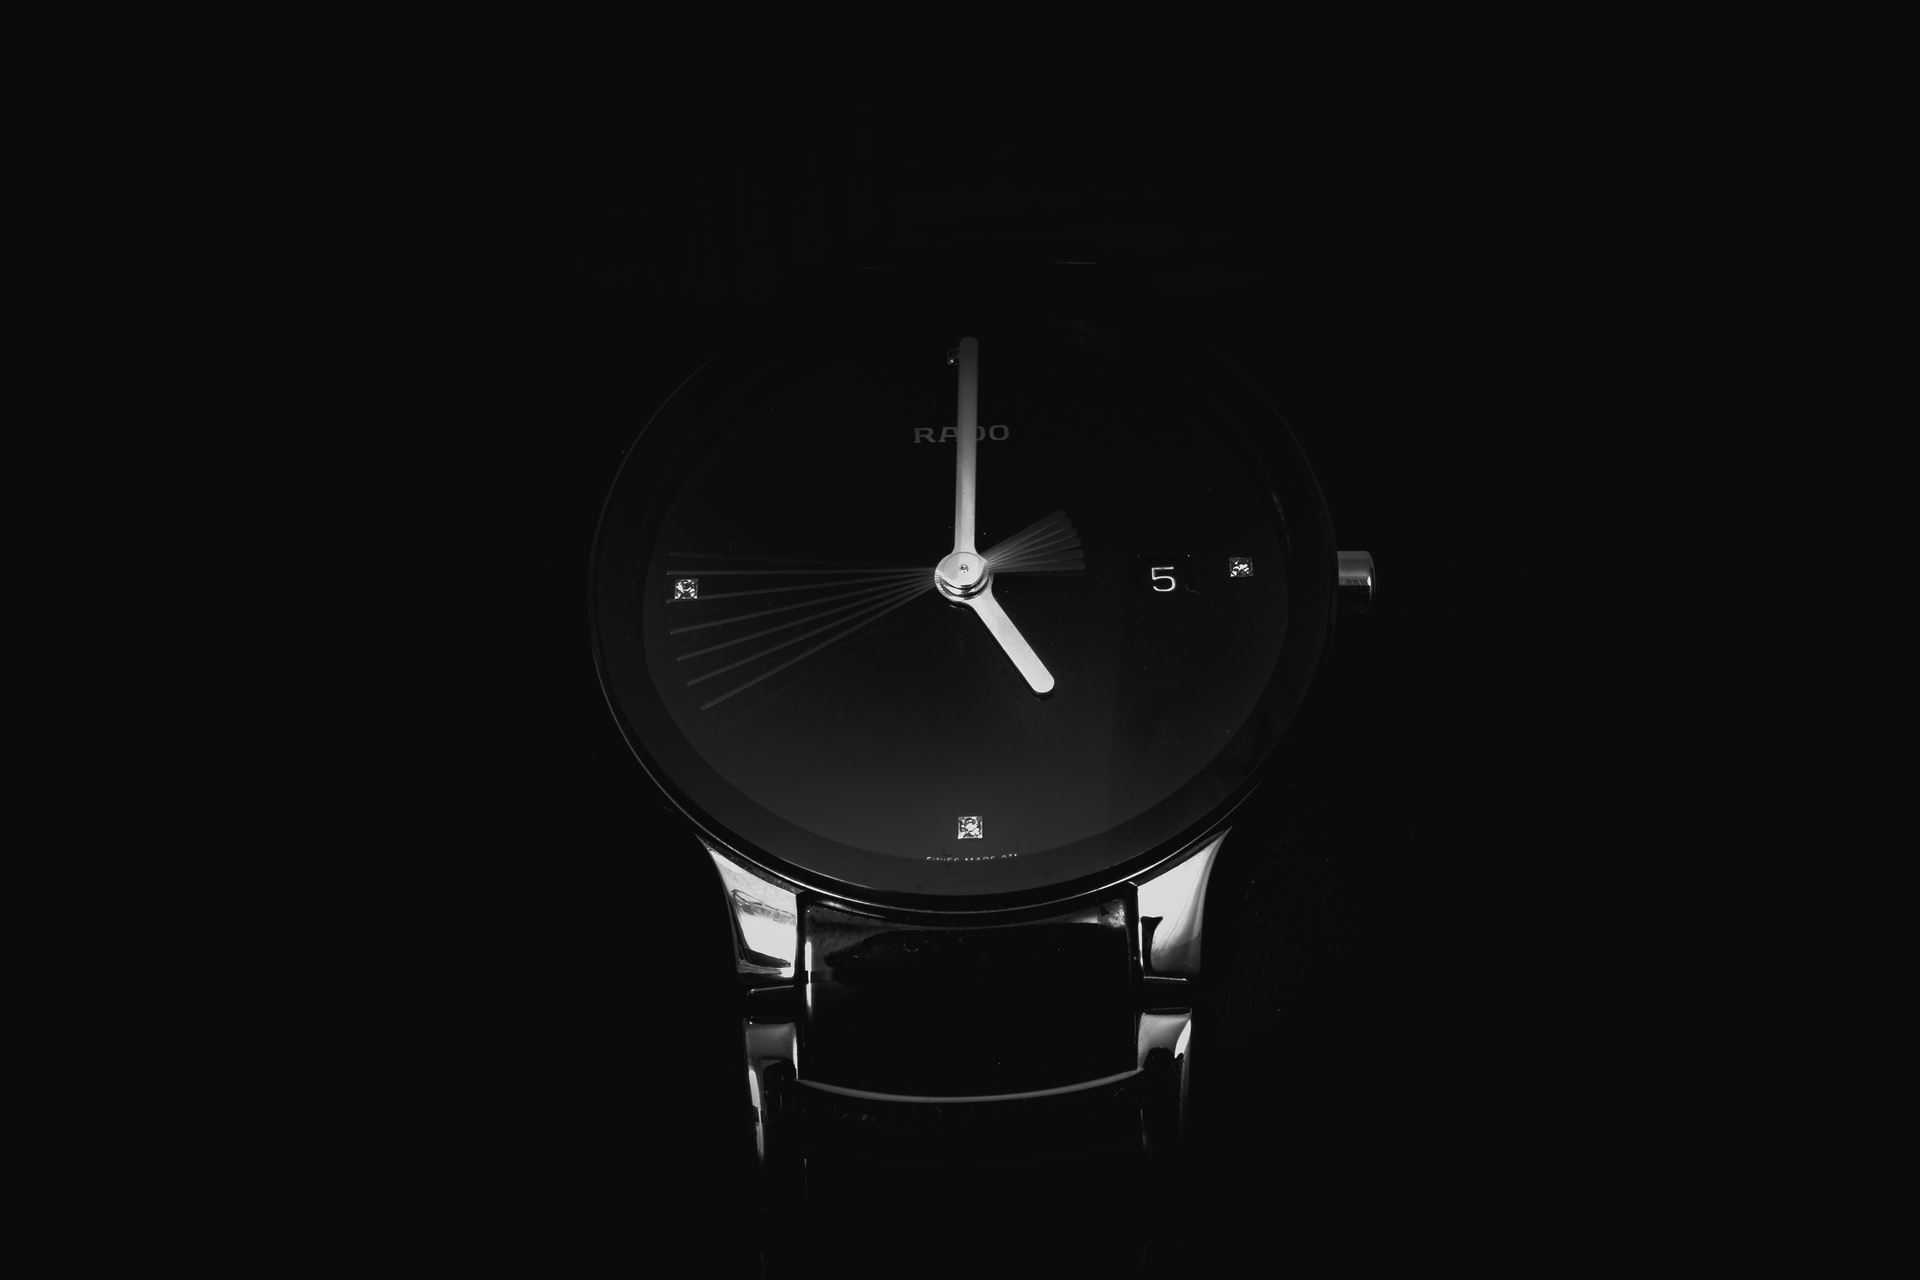 Rado watches for women are stylish and luxurious